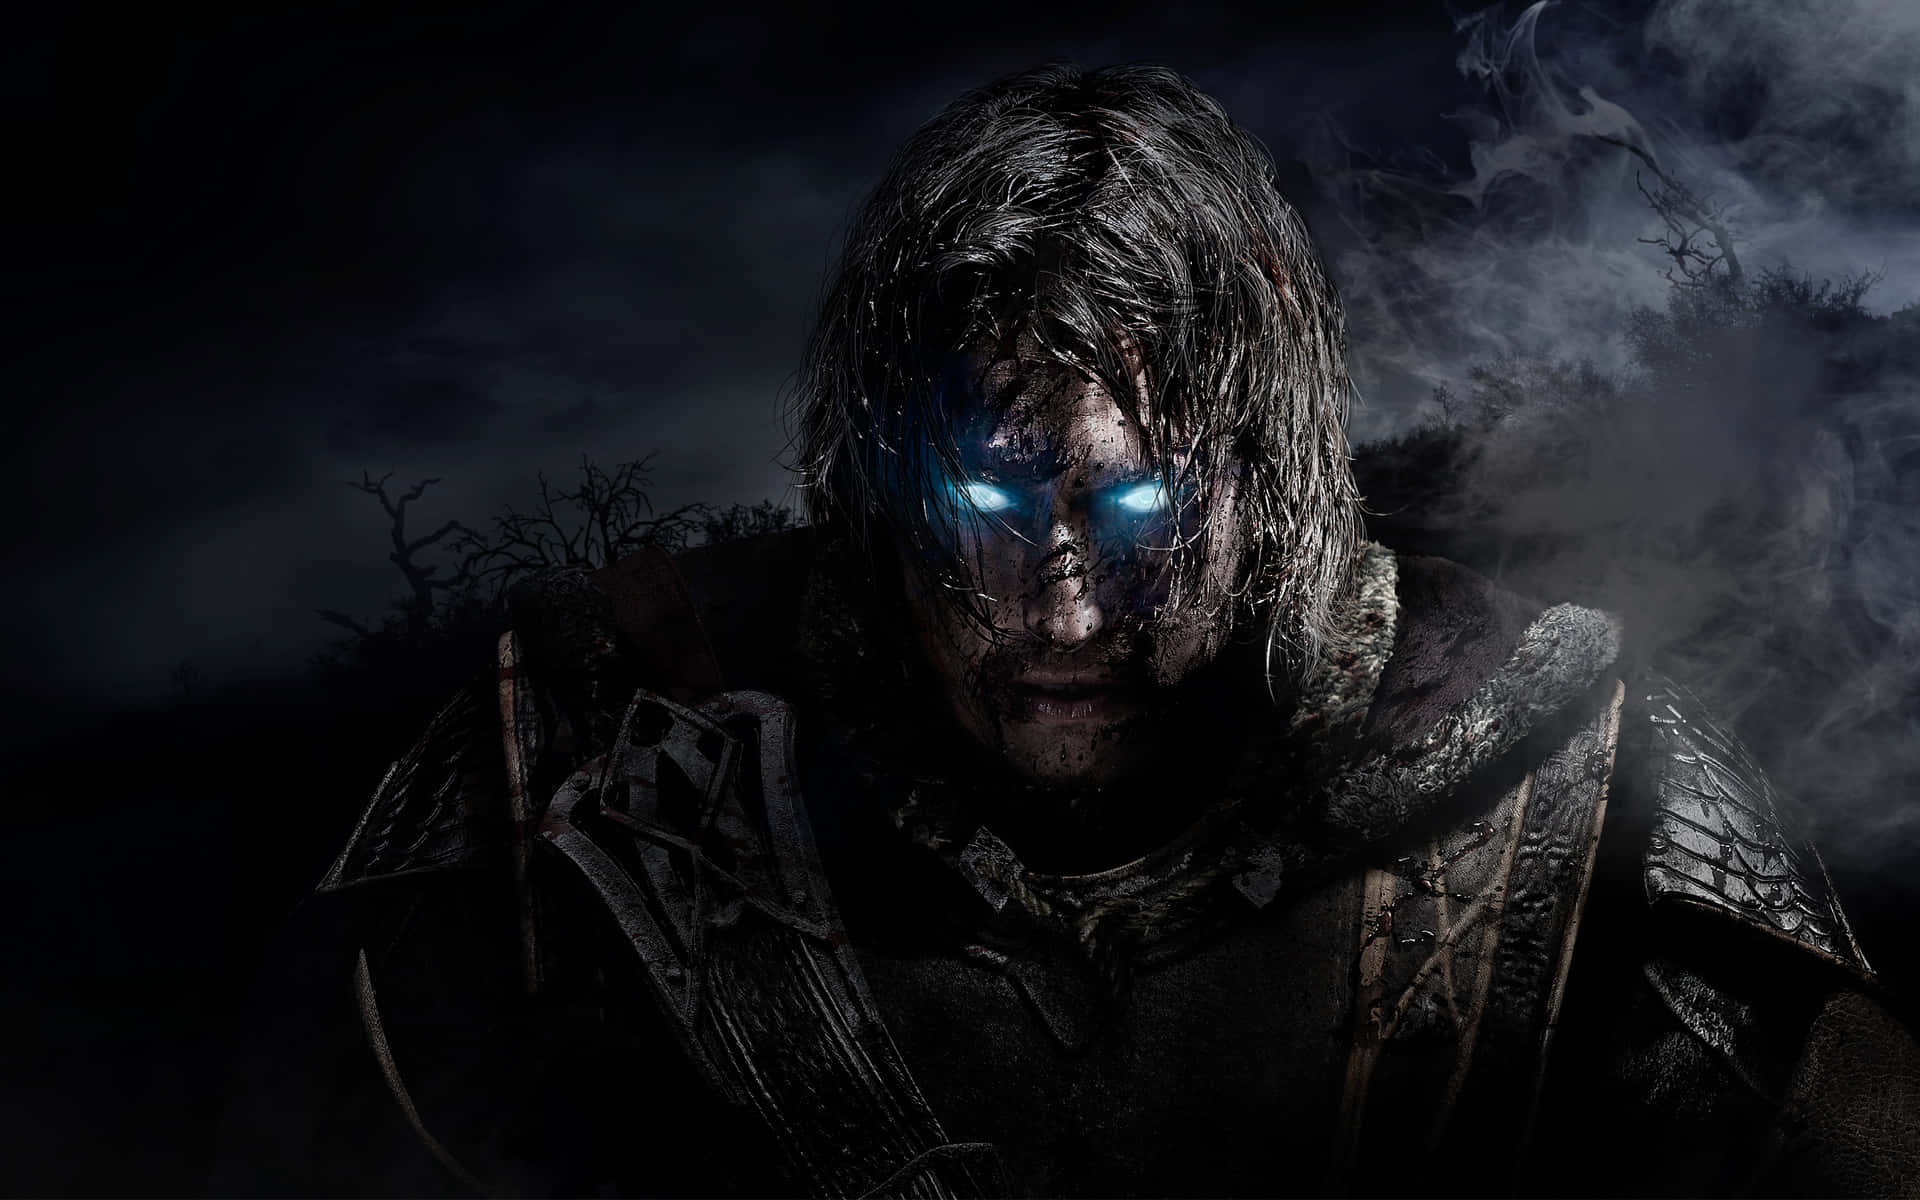 The darkness of Mordor awaits you - Shadow of Mordor